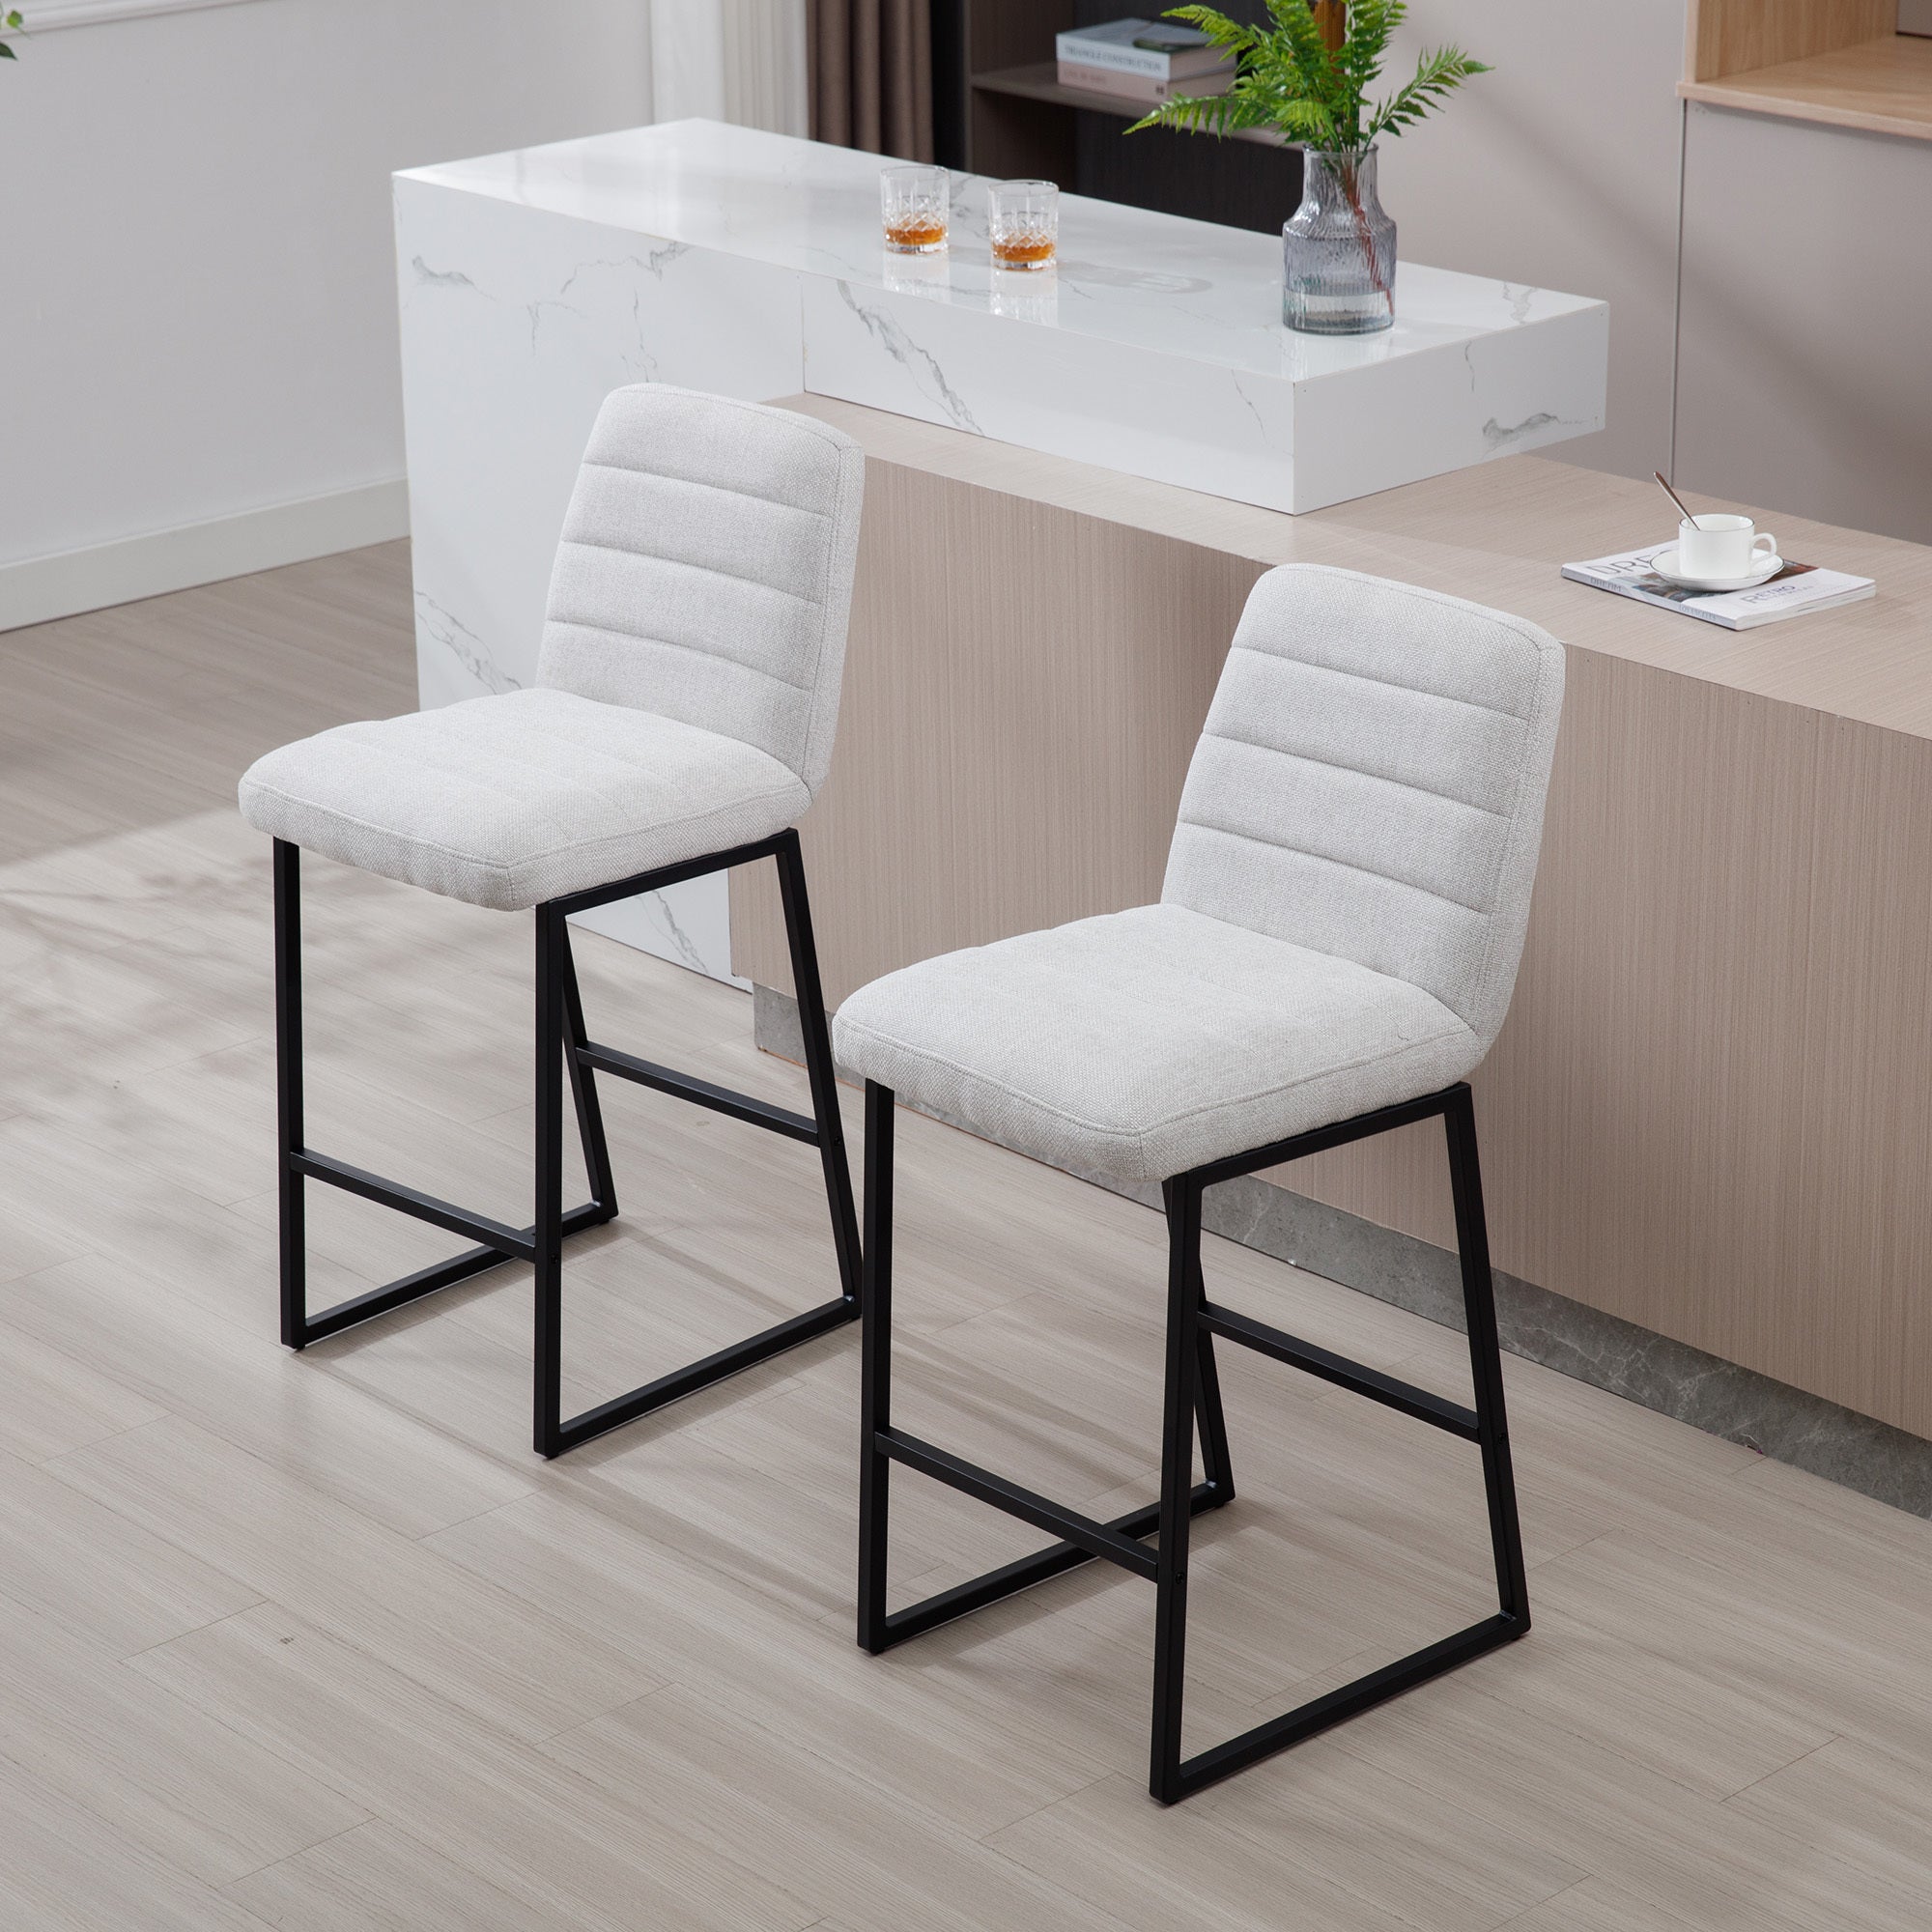 Low Bar Stools Set of 2 Bar Chairs for Living Room beige-kitchen-foam-dry clean-modern-bar